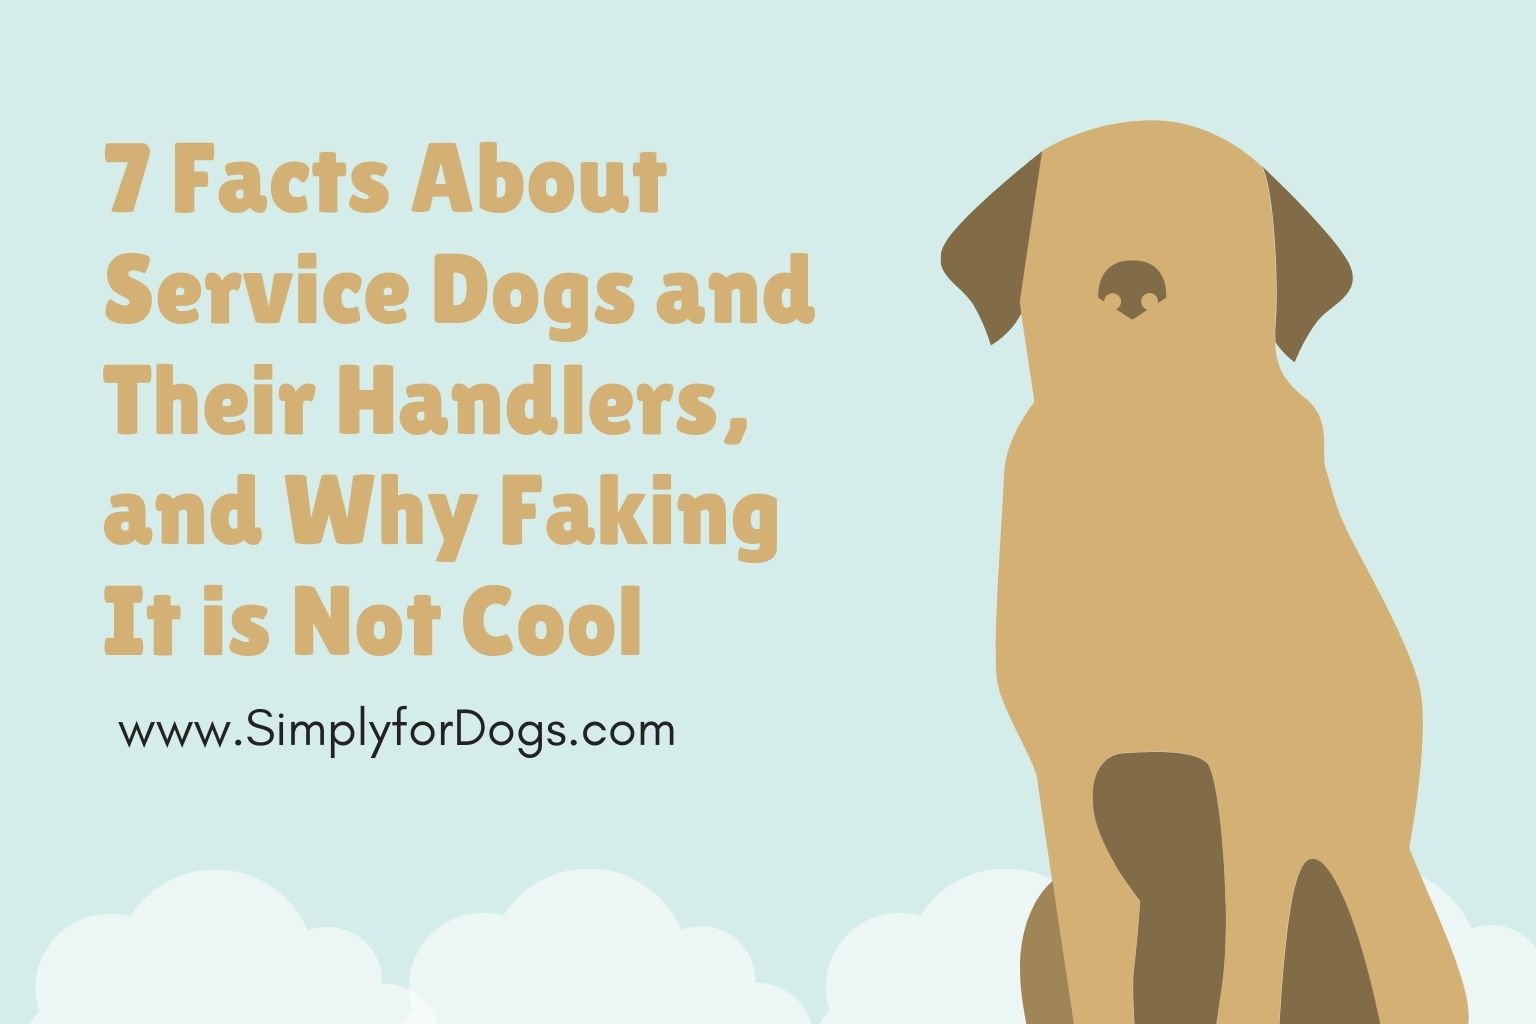 7 Facts About Service Dogs and Their Handlers, and Why Faking It is Not Cool